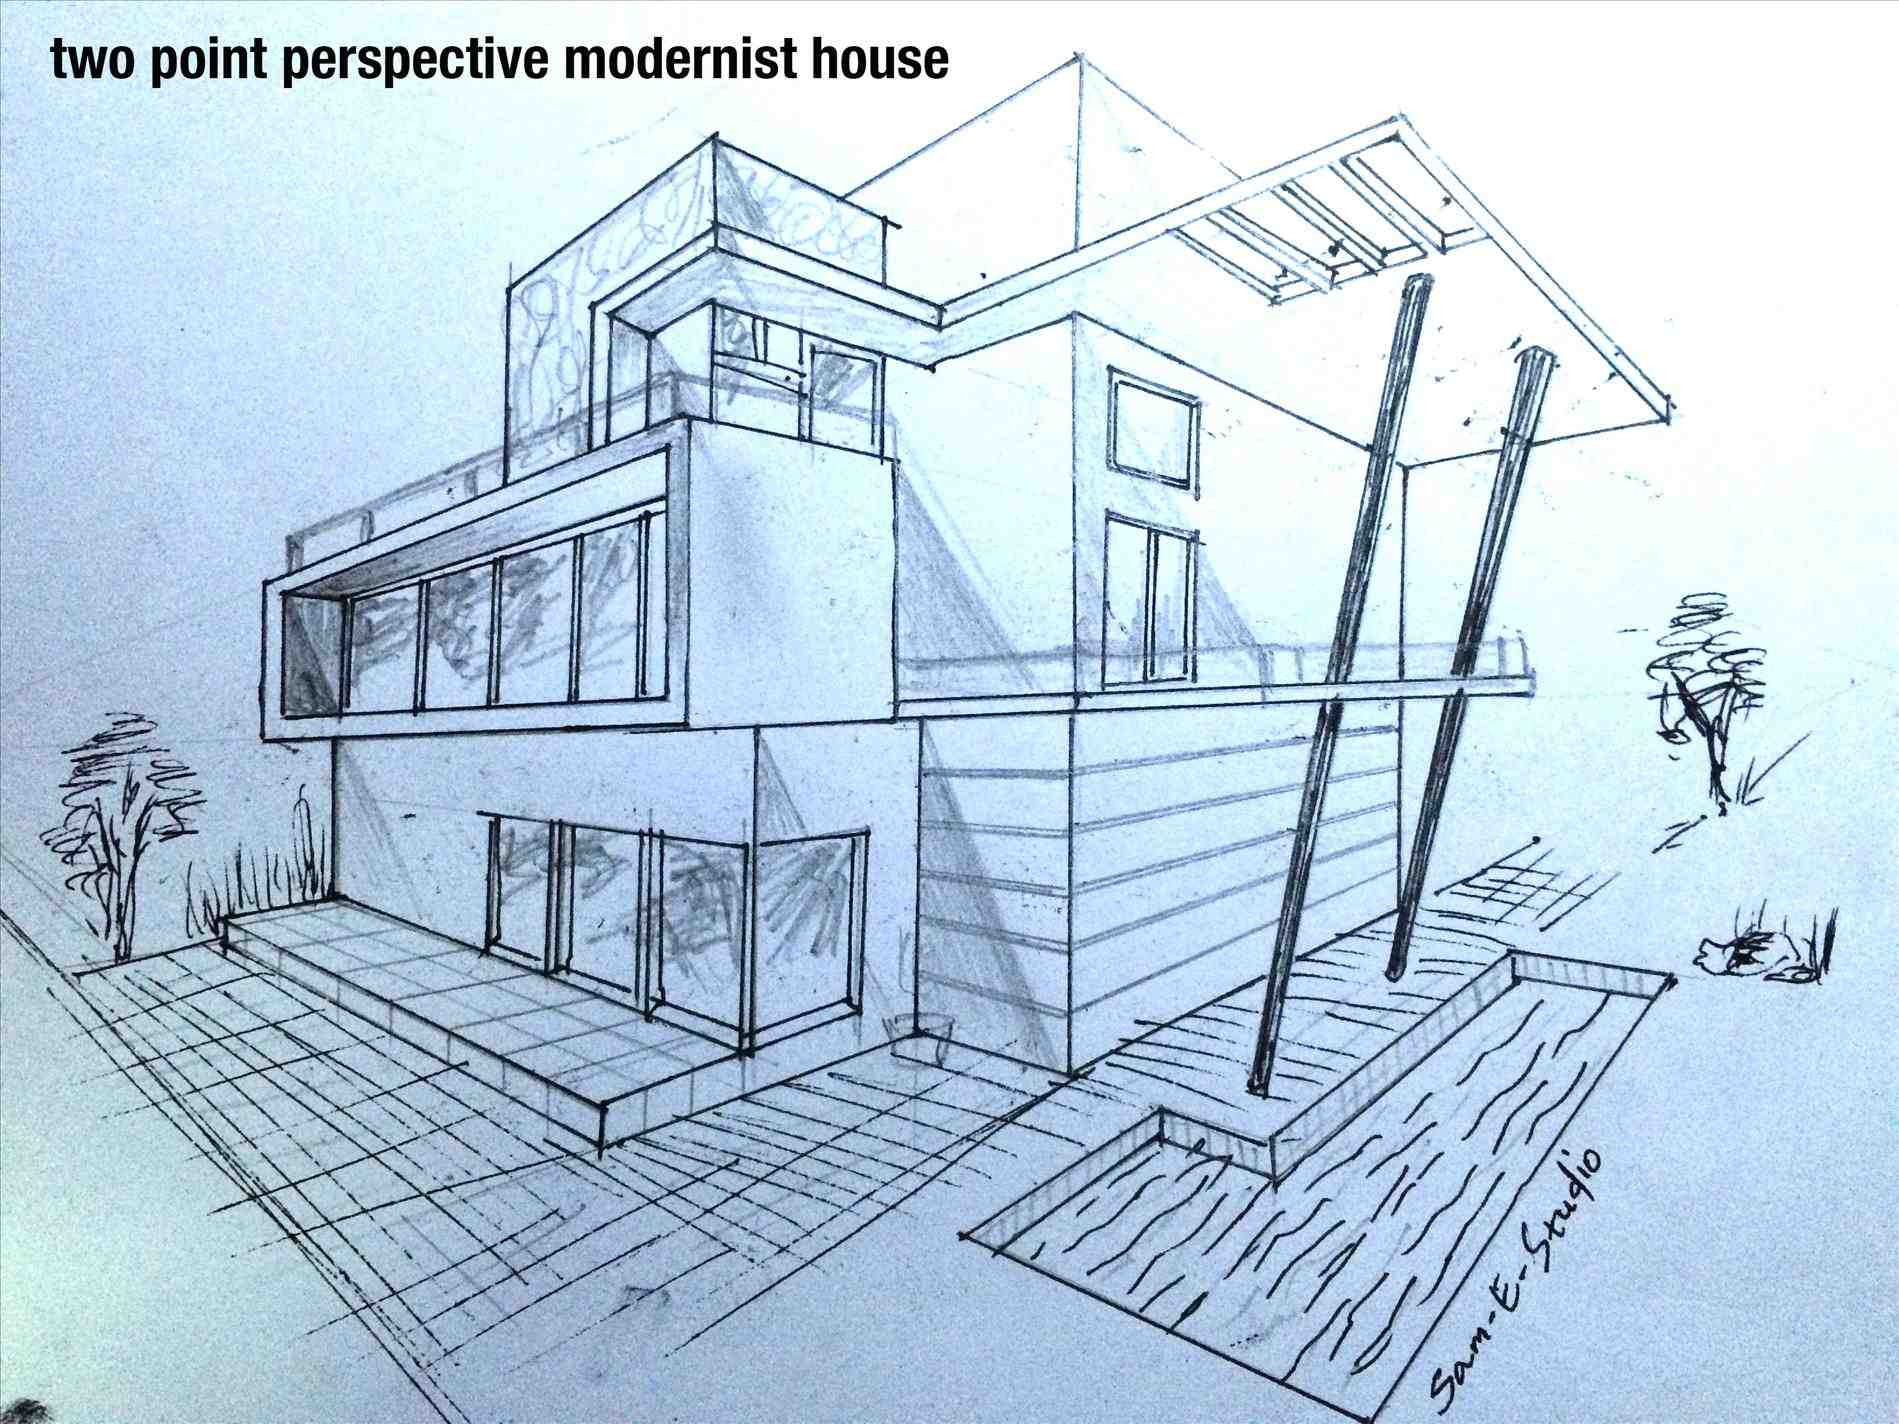 dream house sketch easy simple modern house drawing